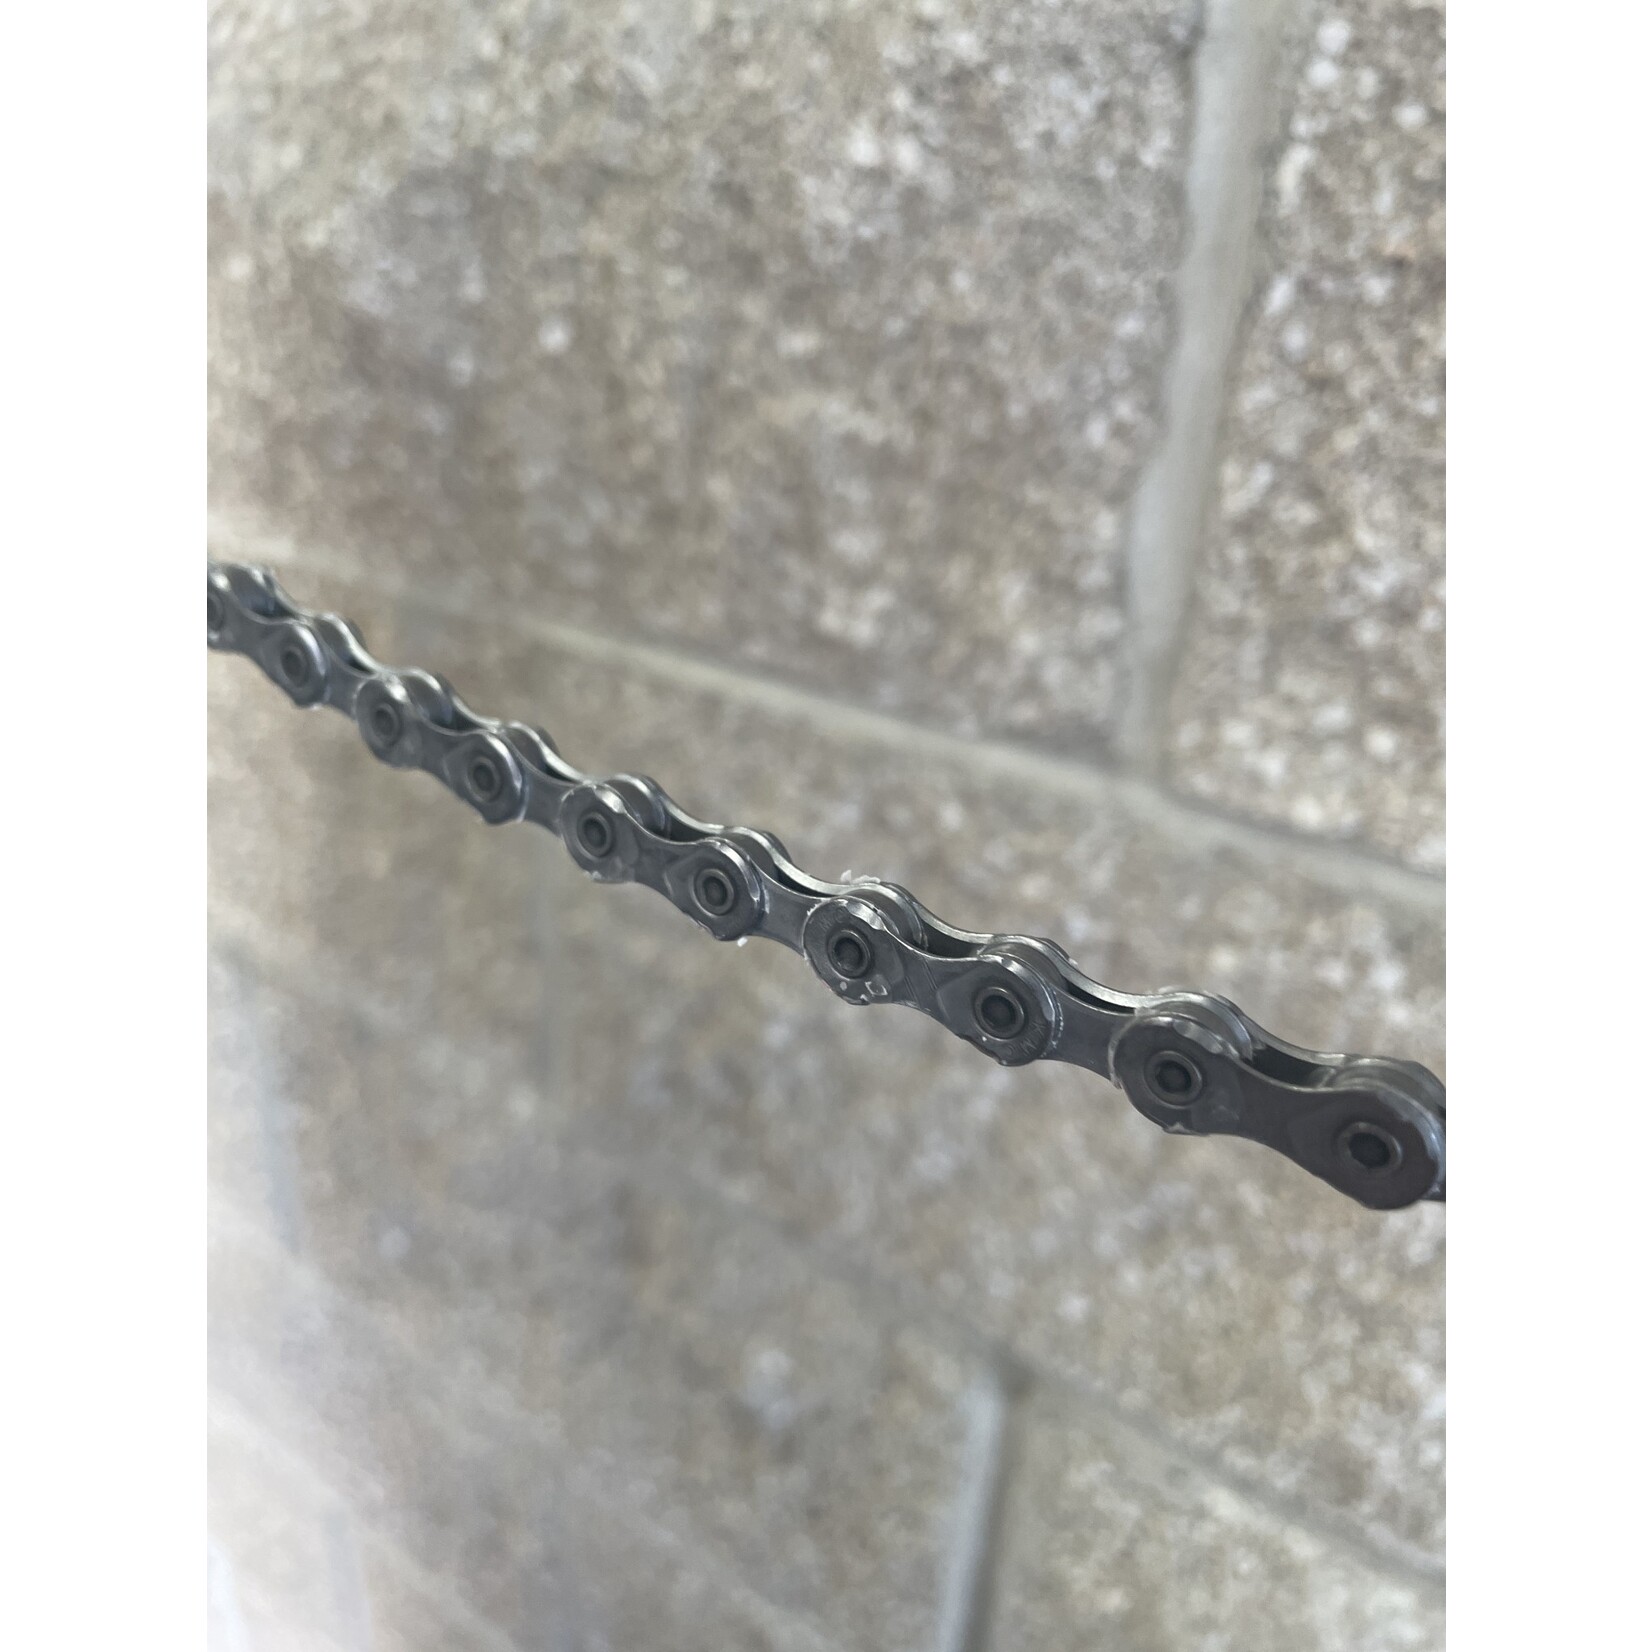 KMC KMC X11 EPT Chain - 11-Speed, 116 Links, Gray -  waxing available